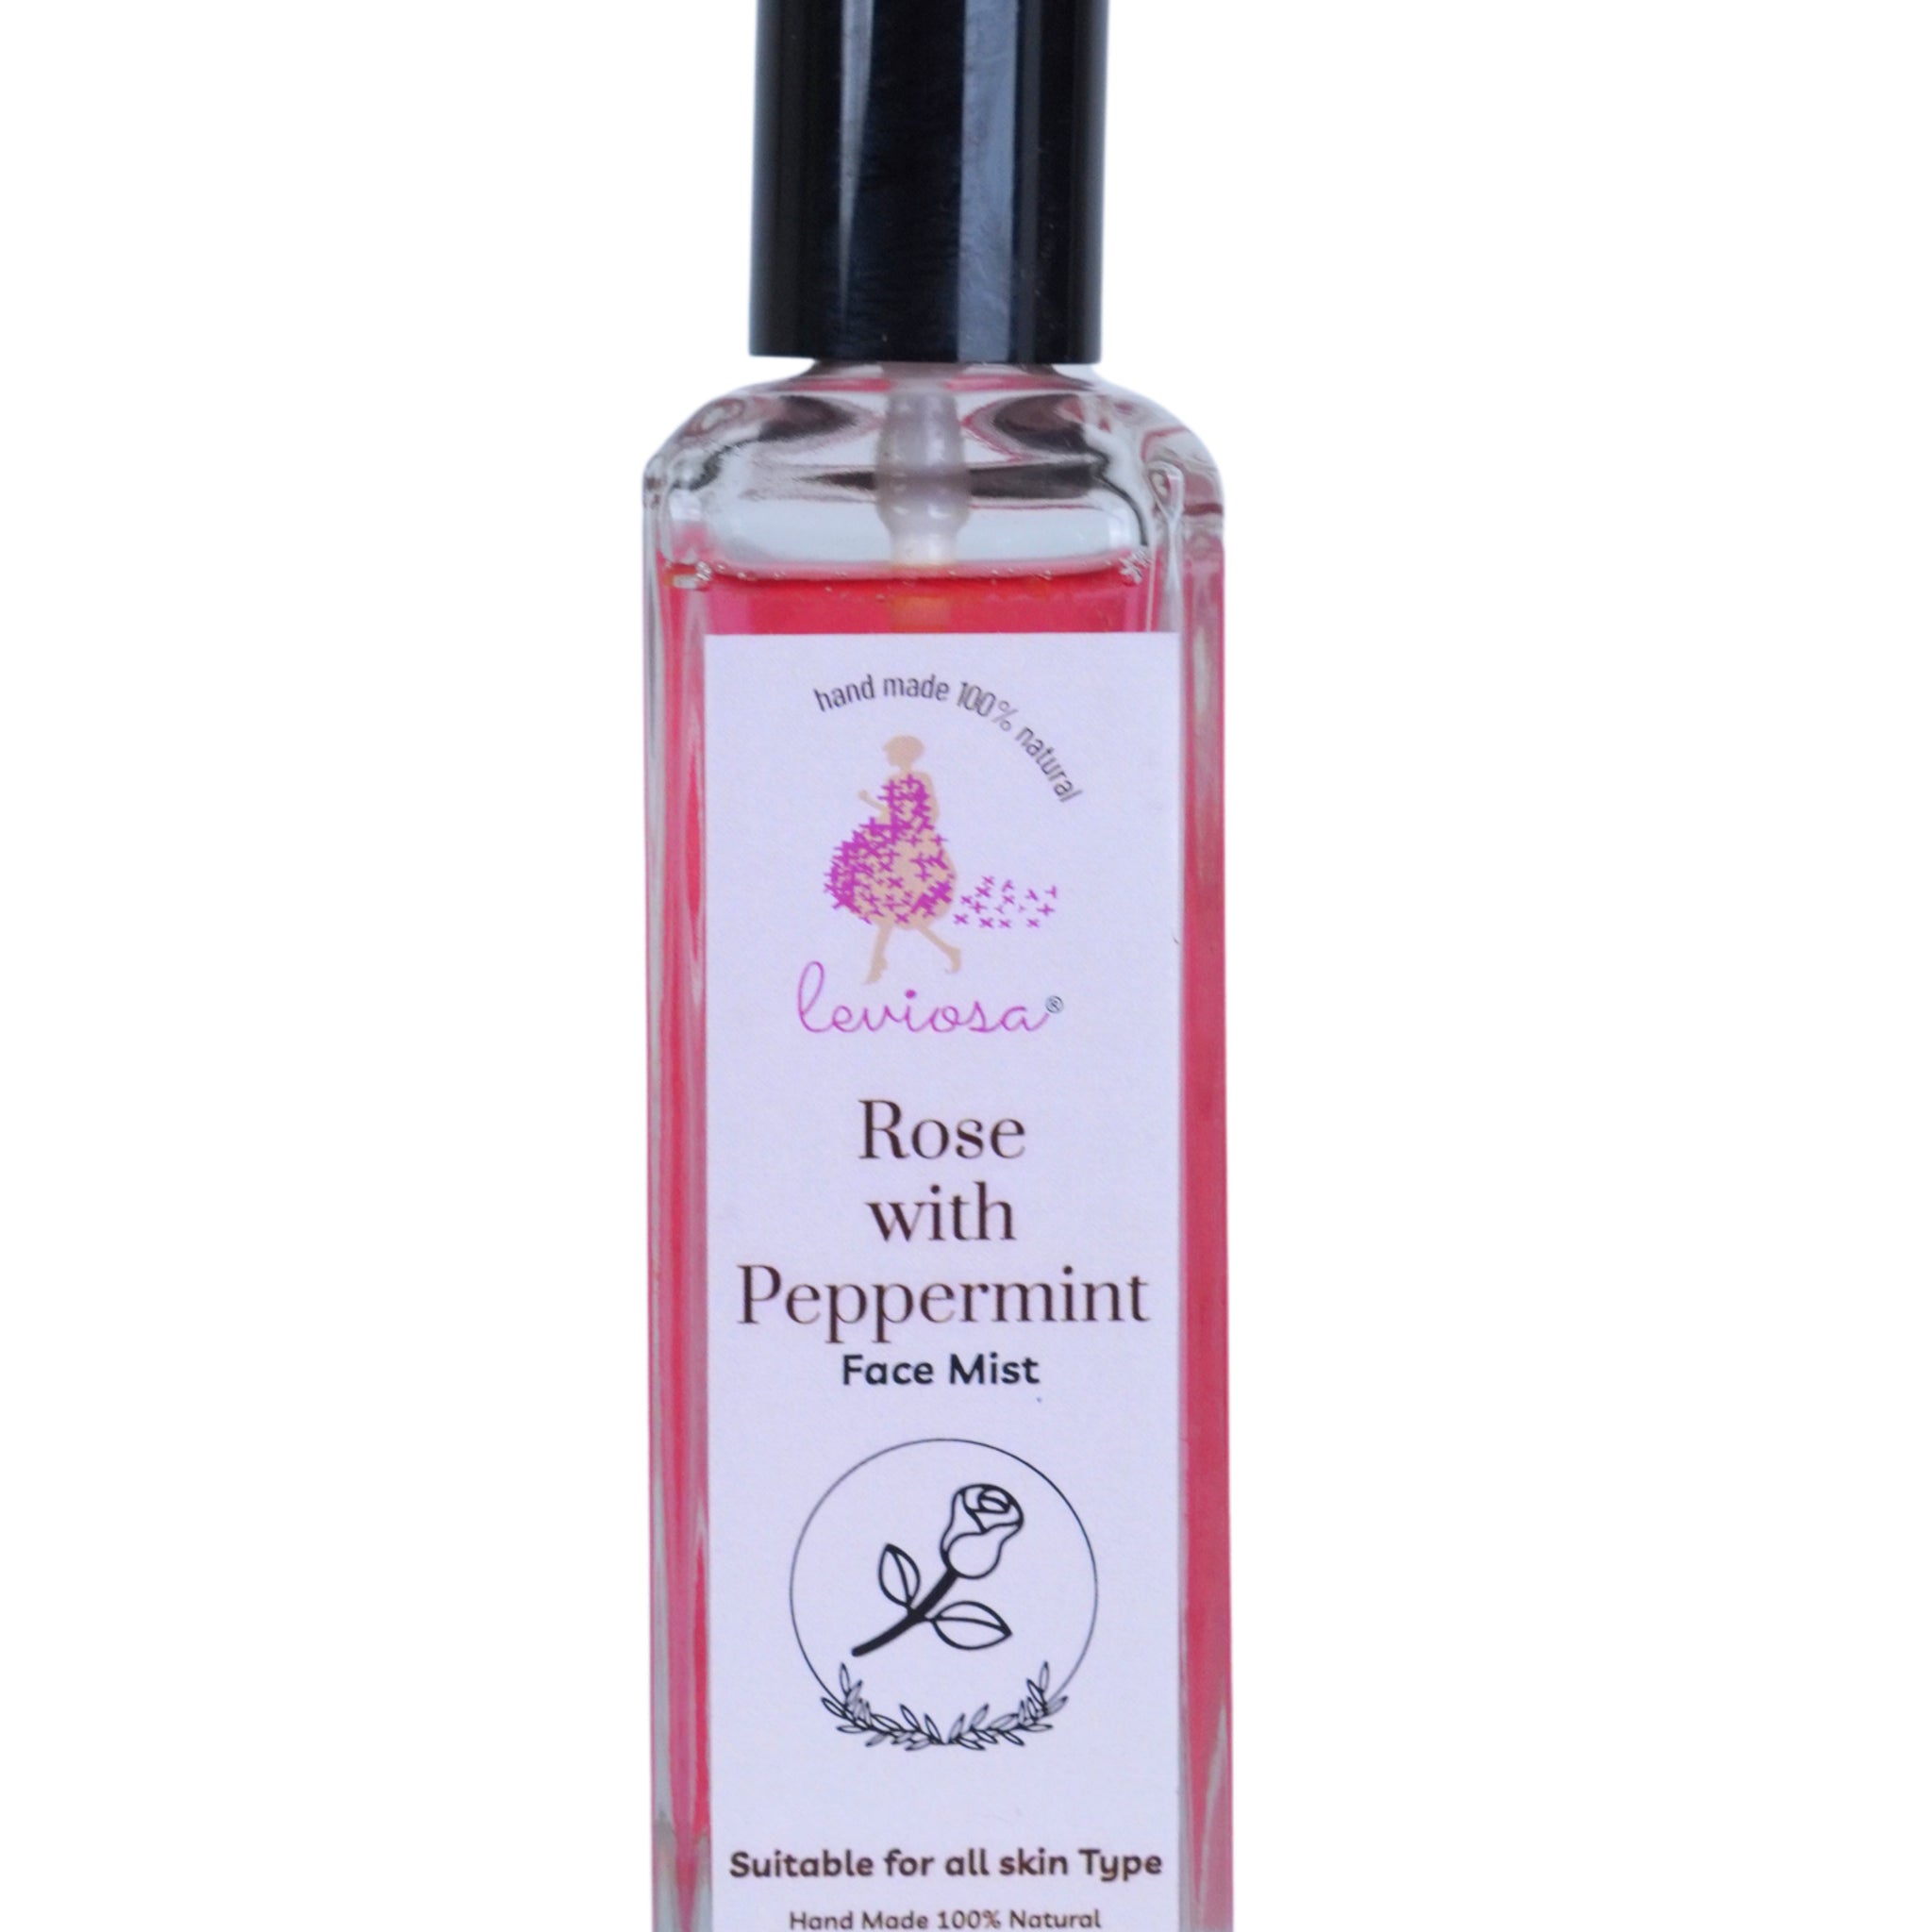 ROSE WITH PEPPERMINT FACE MIST